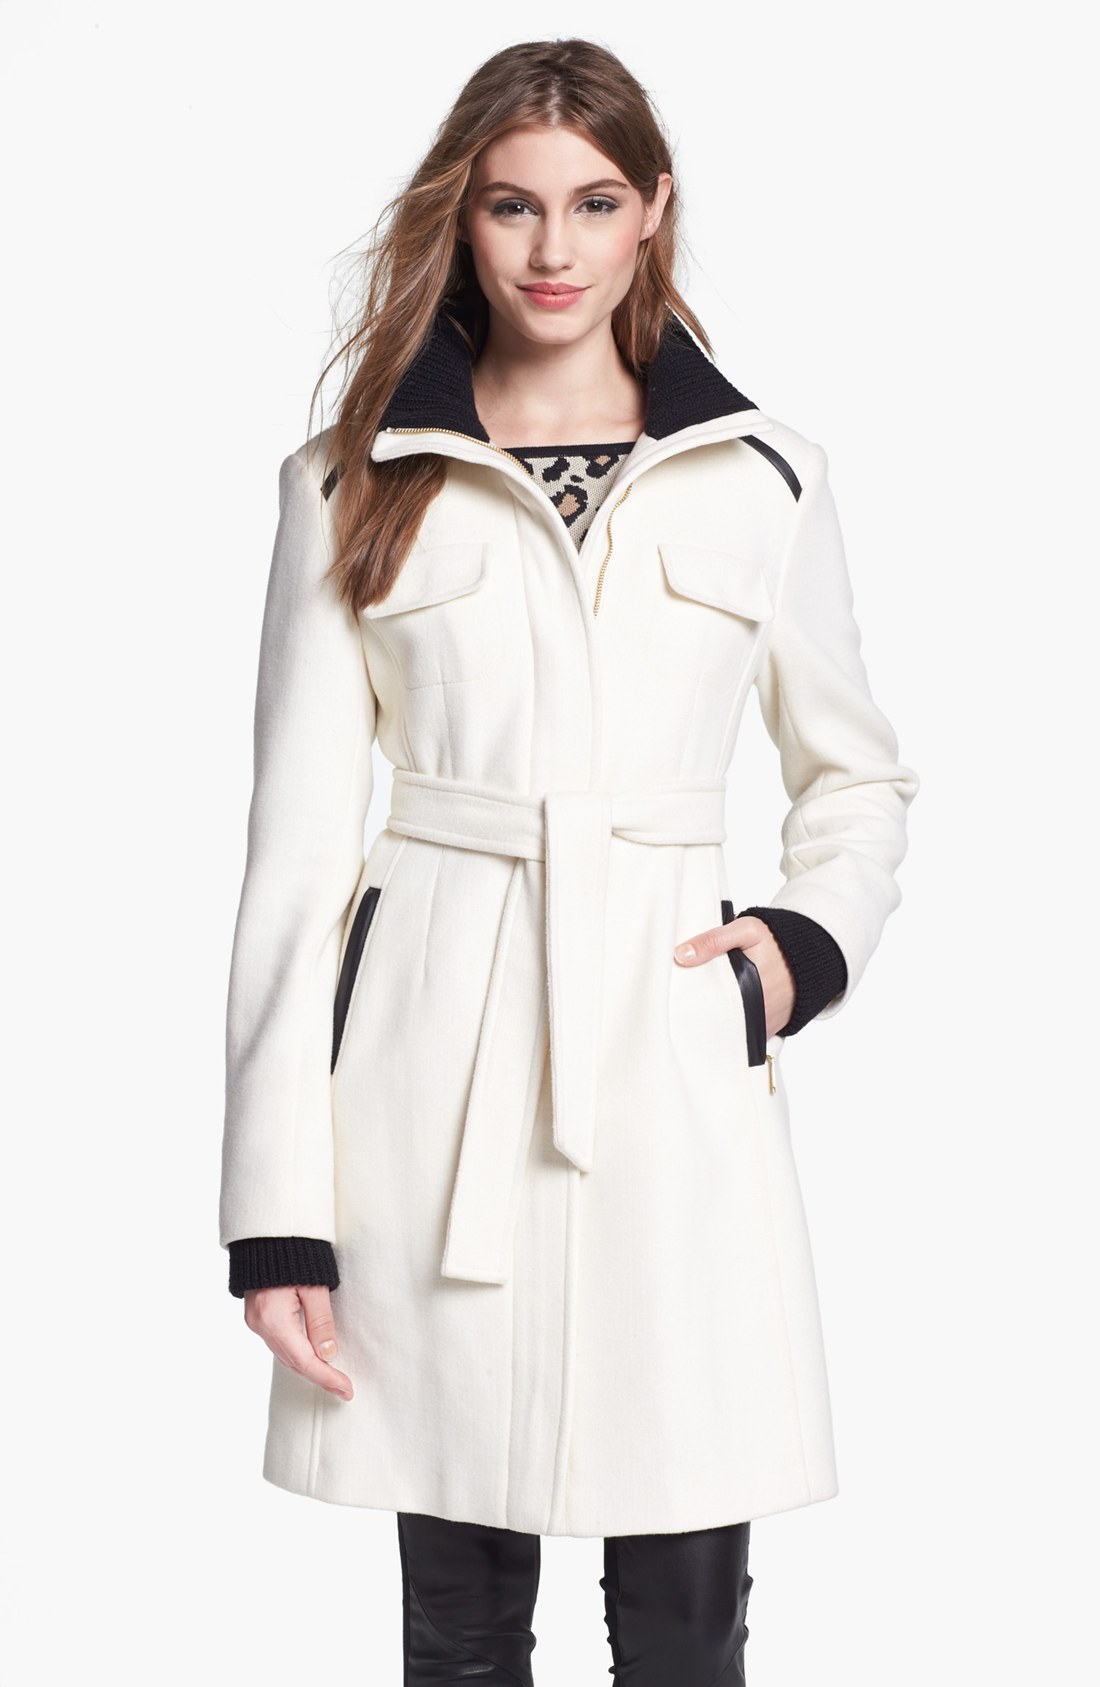 Vince Camuto Knit Faux Leather Trim Belted Wool Blend Coat in Beige